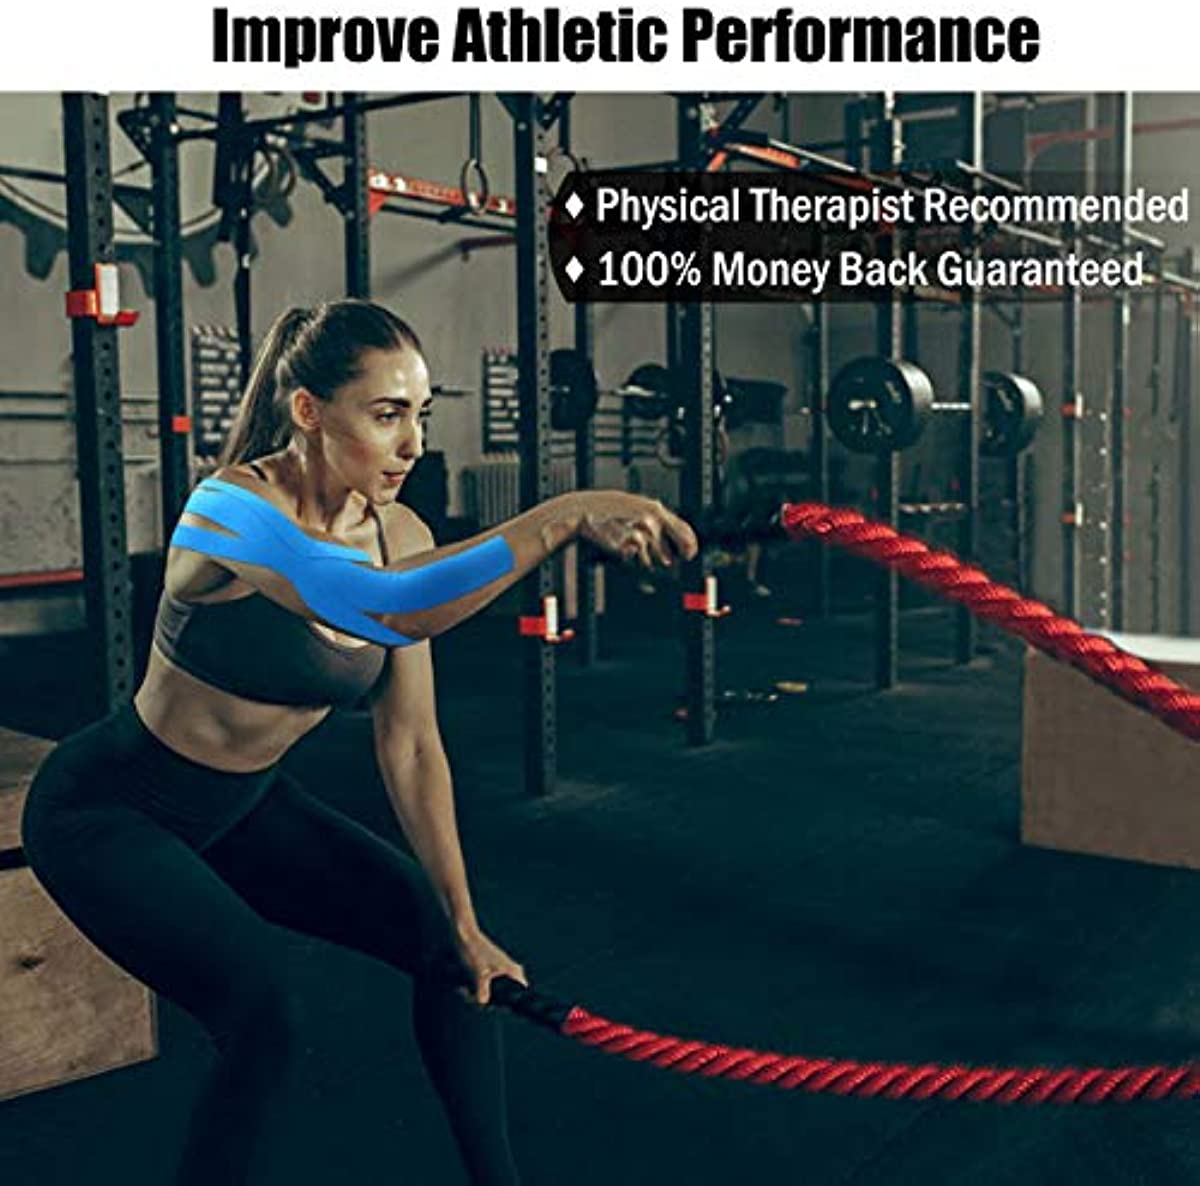 Kinesiology Tape - Athletic Sports Lifting Tape for Pain Relief, Muscle and Joint Support, Workout Recovery, Achilles, Back, Knee, Shoulder, Ankle, Wrist, Foot, Elbow, Arm, Physical Therapy Equipment